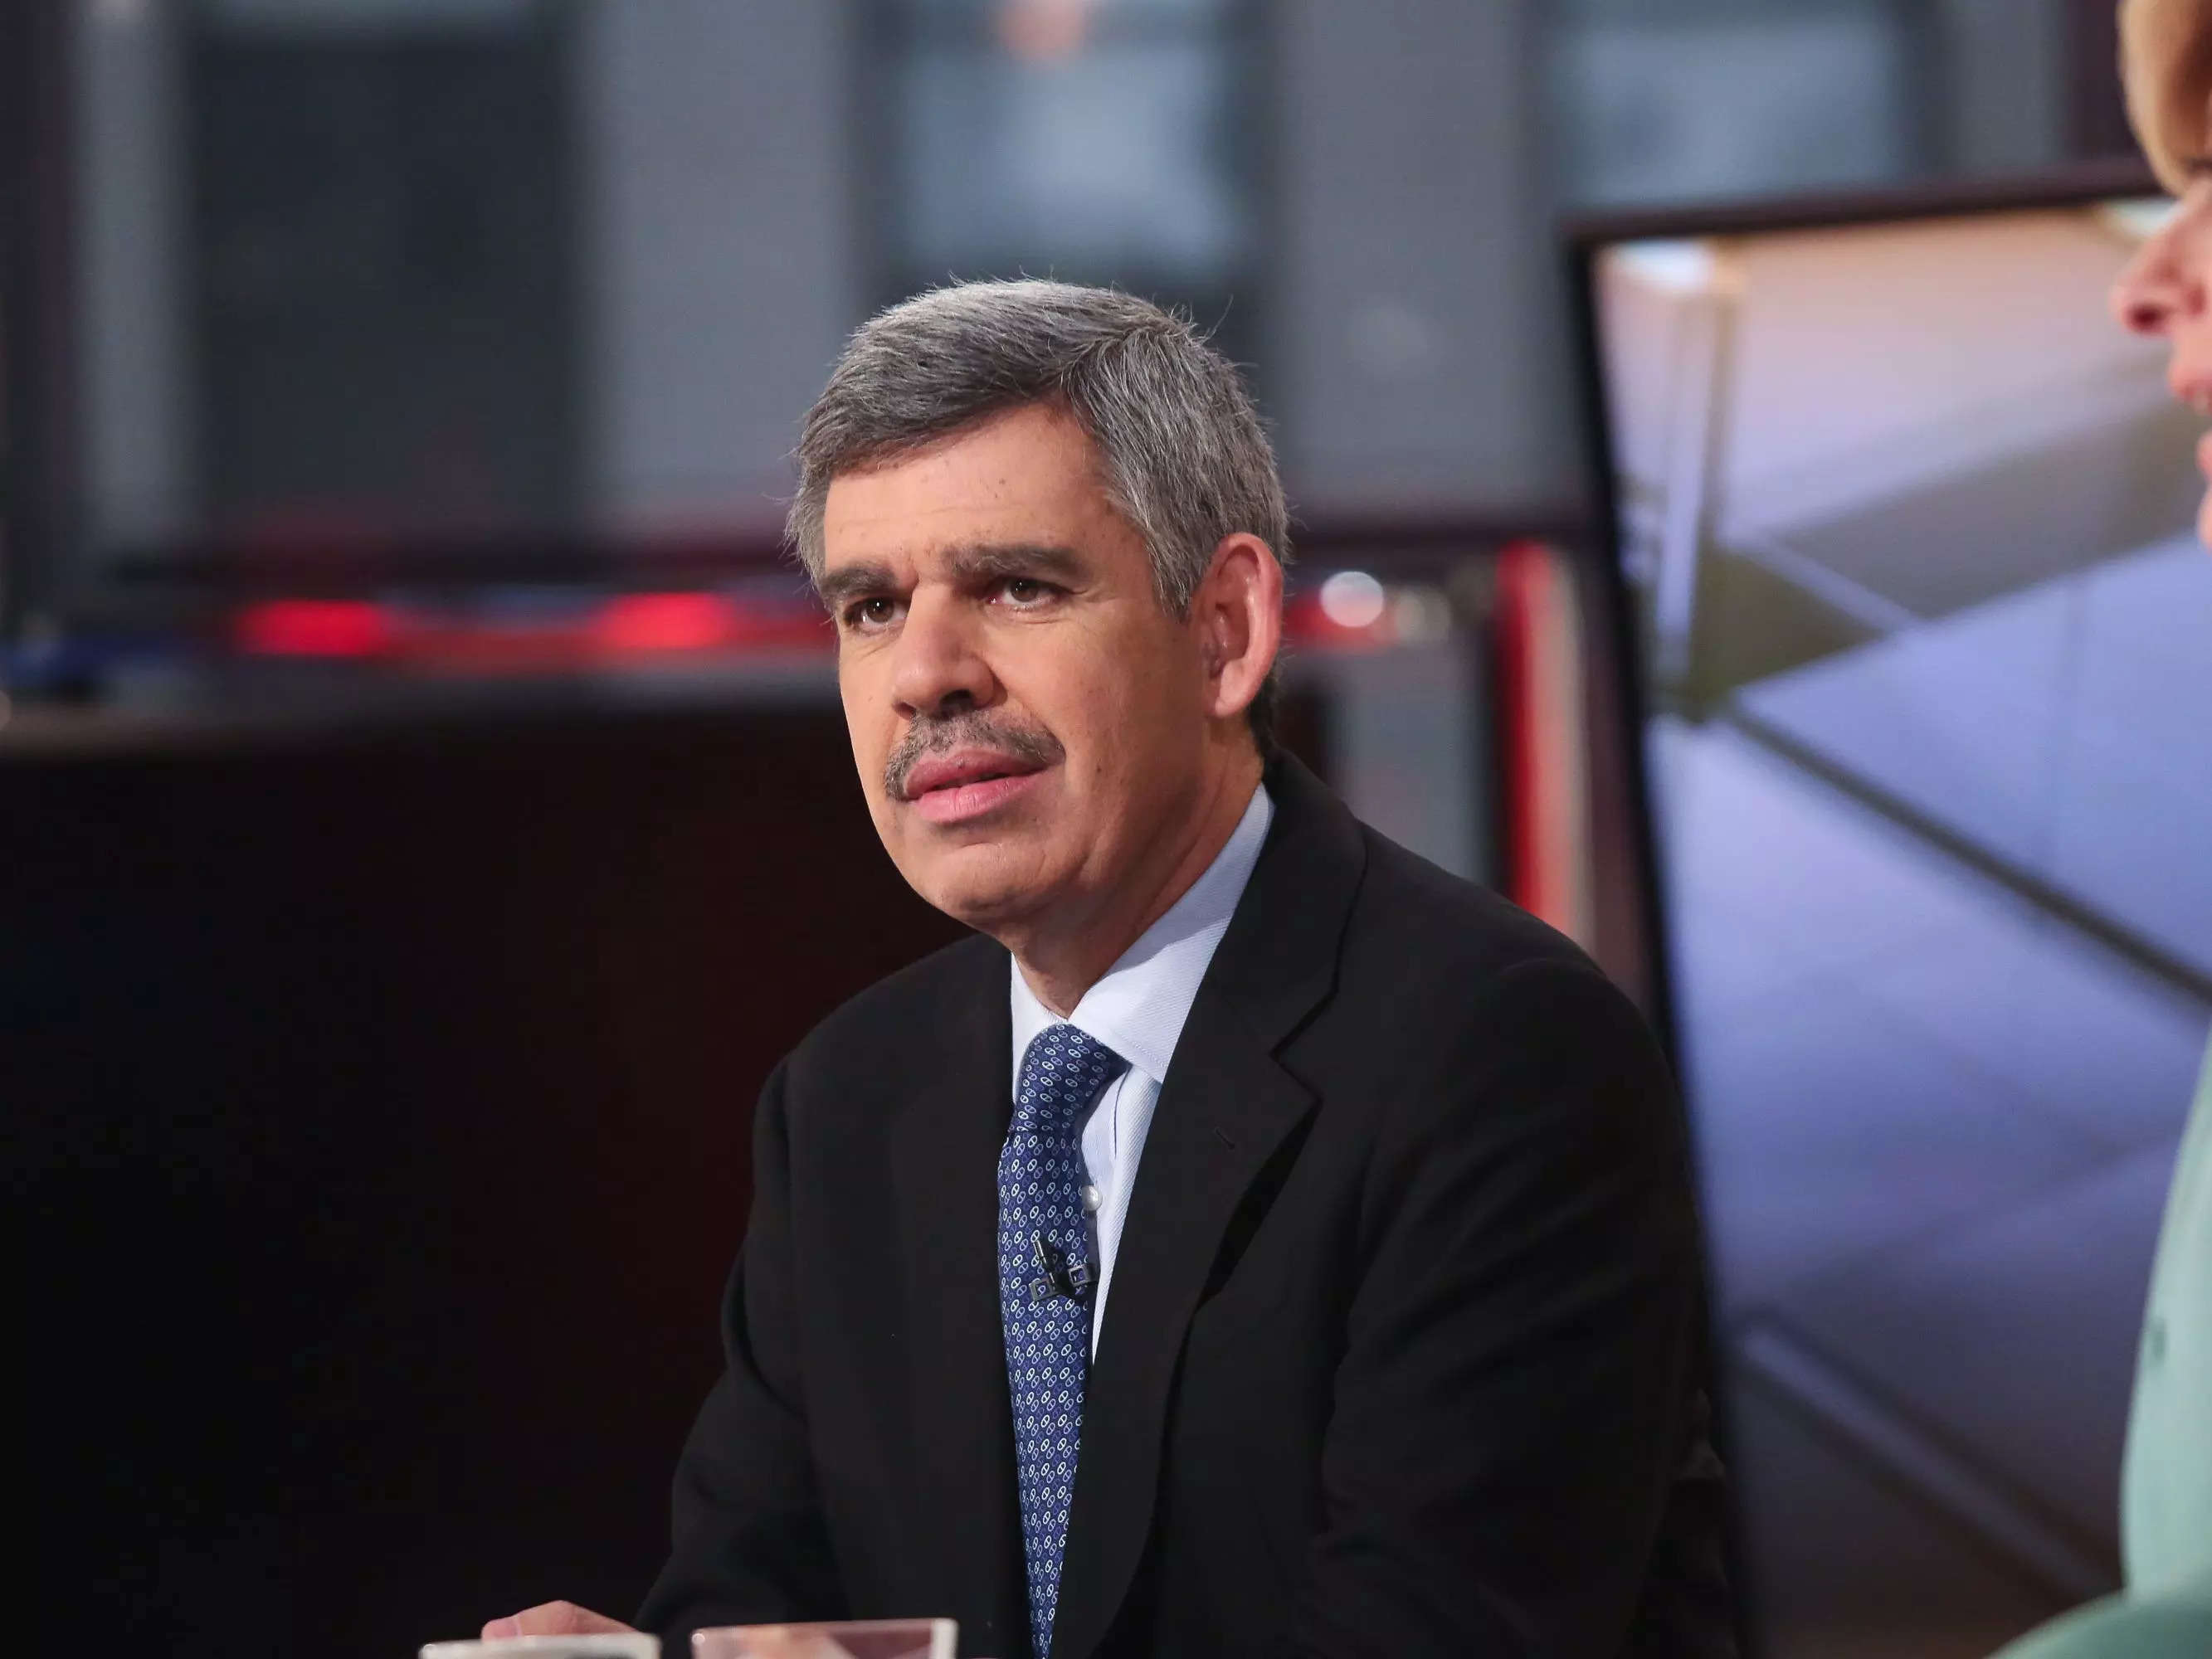 It's possible the US can dodge a recession but stagflation is unavoidable, Mohamed El-Erian says